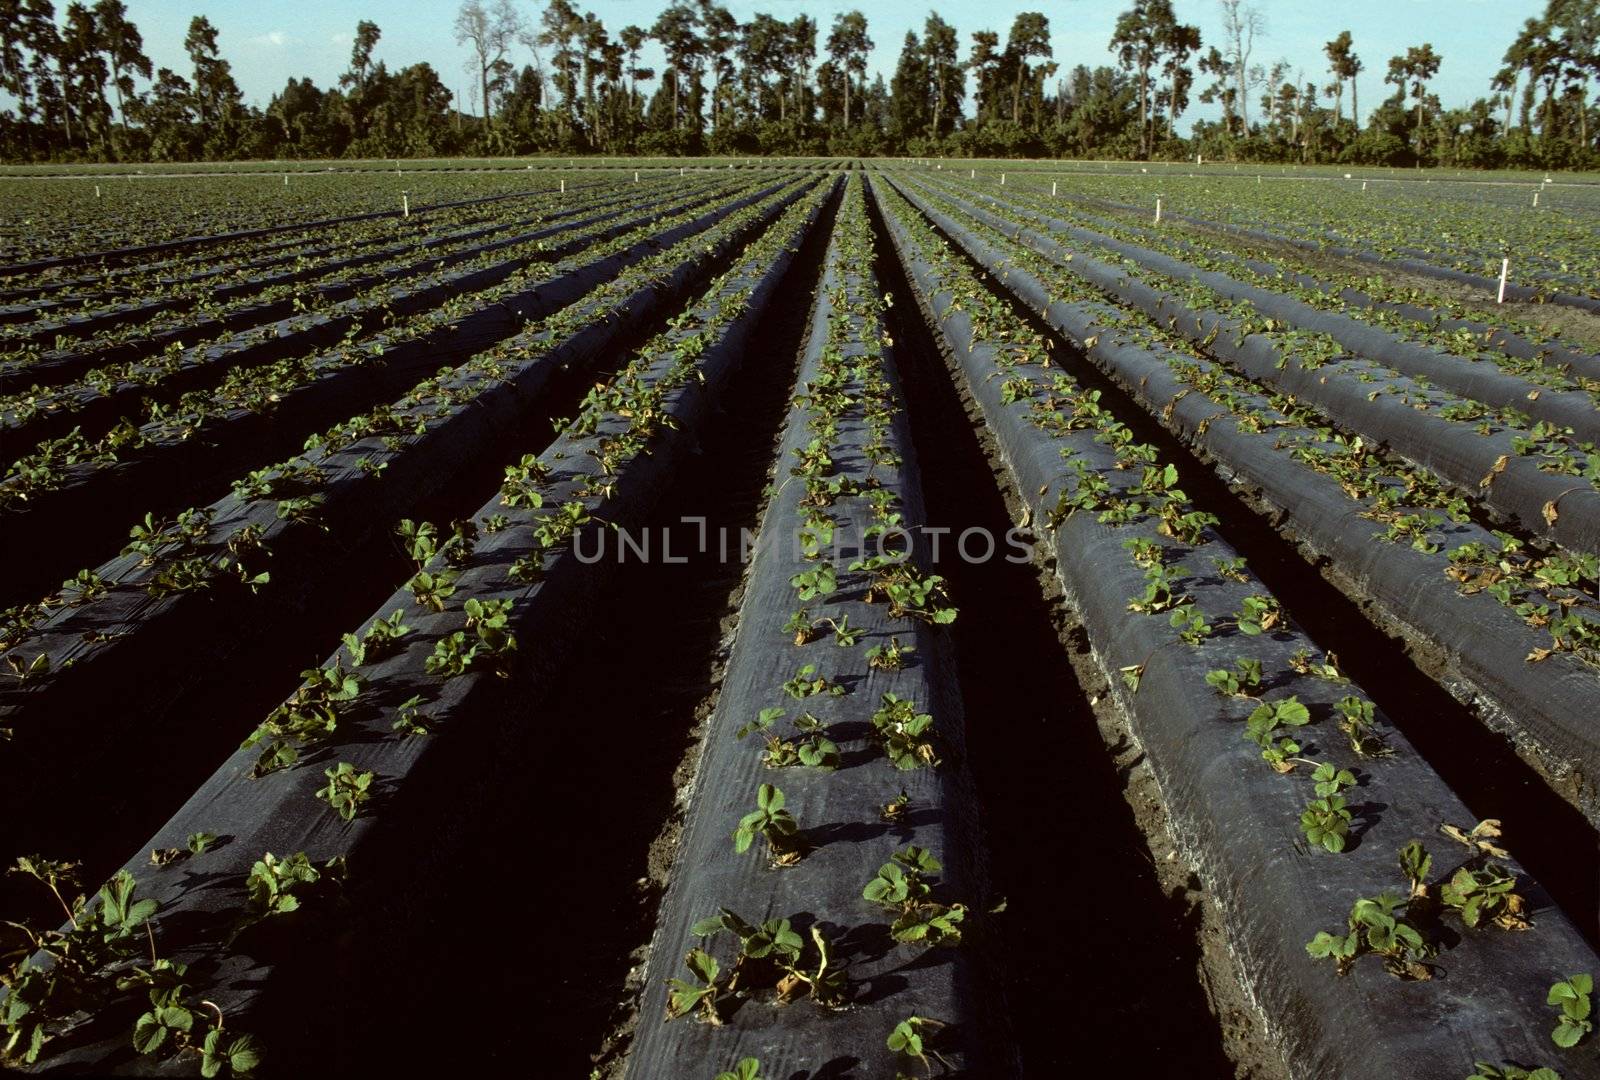 Rows of young strawberry plants in a field in Florida